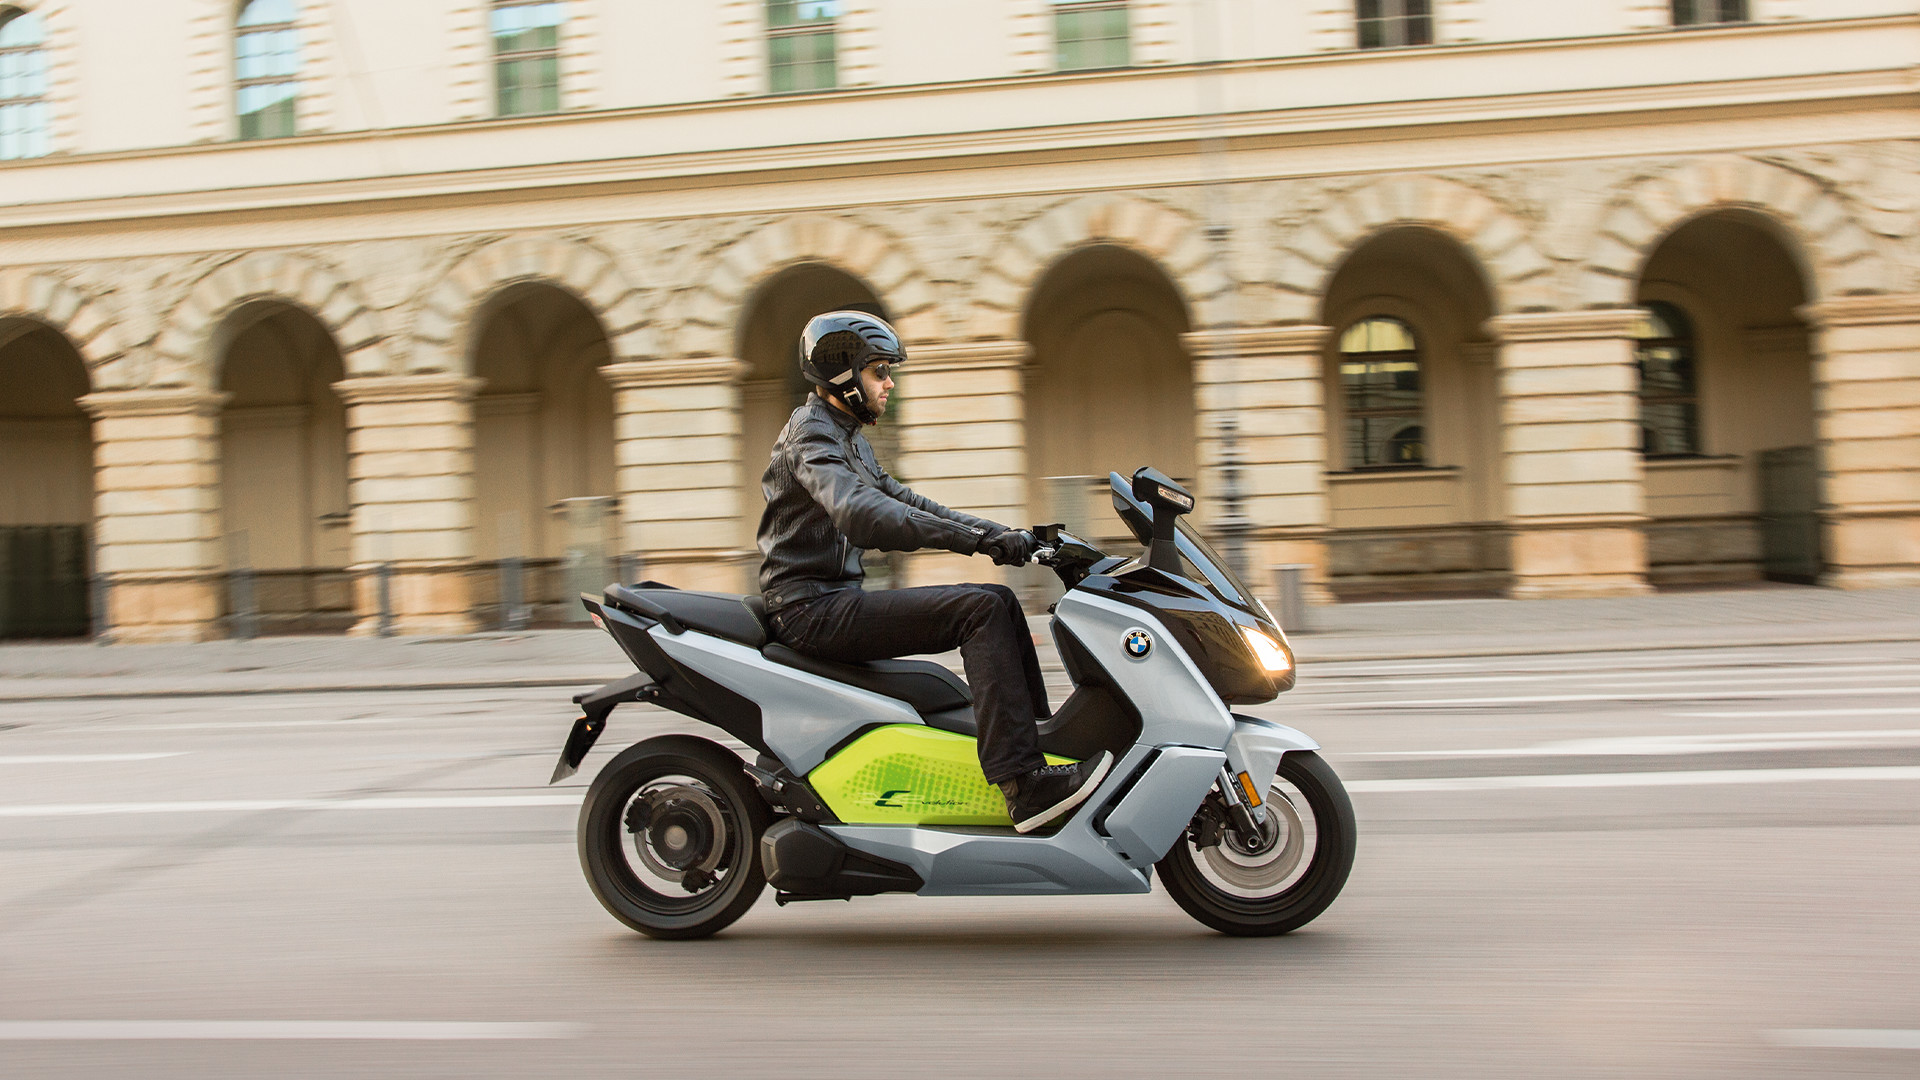 Bmw C Evolution Electric Scooter 2018 Review Electric Vehicles Promoting Eco Friendly Travel